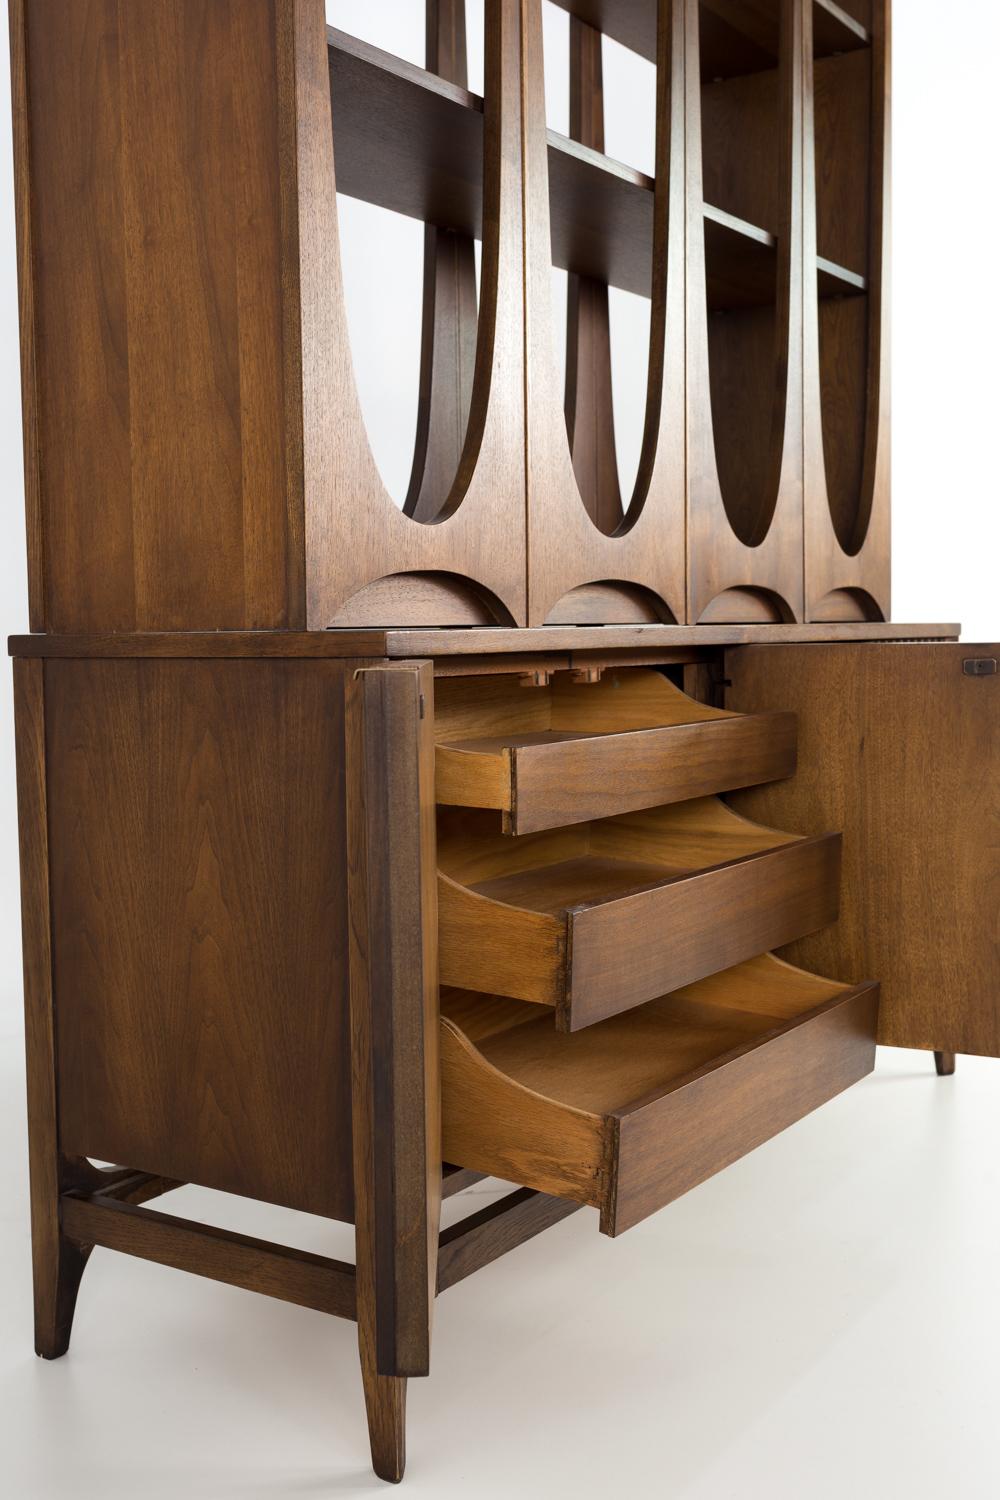 Wood Broyhill Brasilia Mid Century Room Divider Wall Unit Shelving For Sale